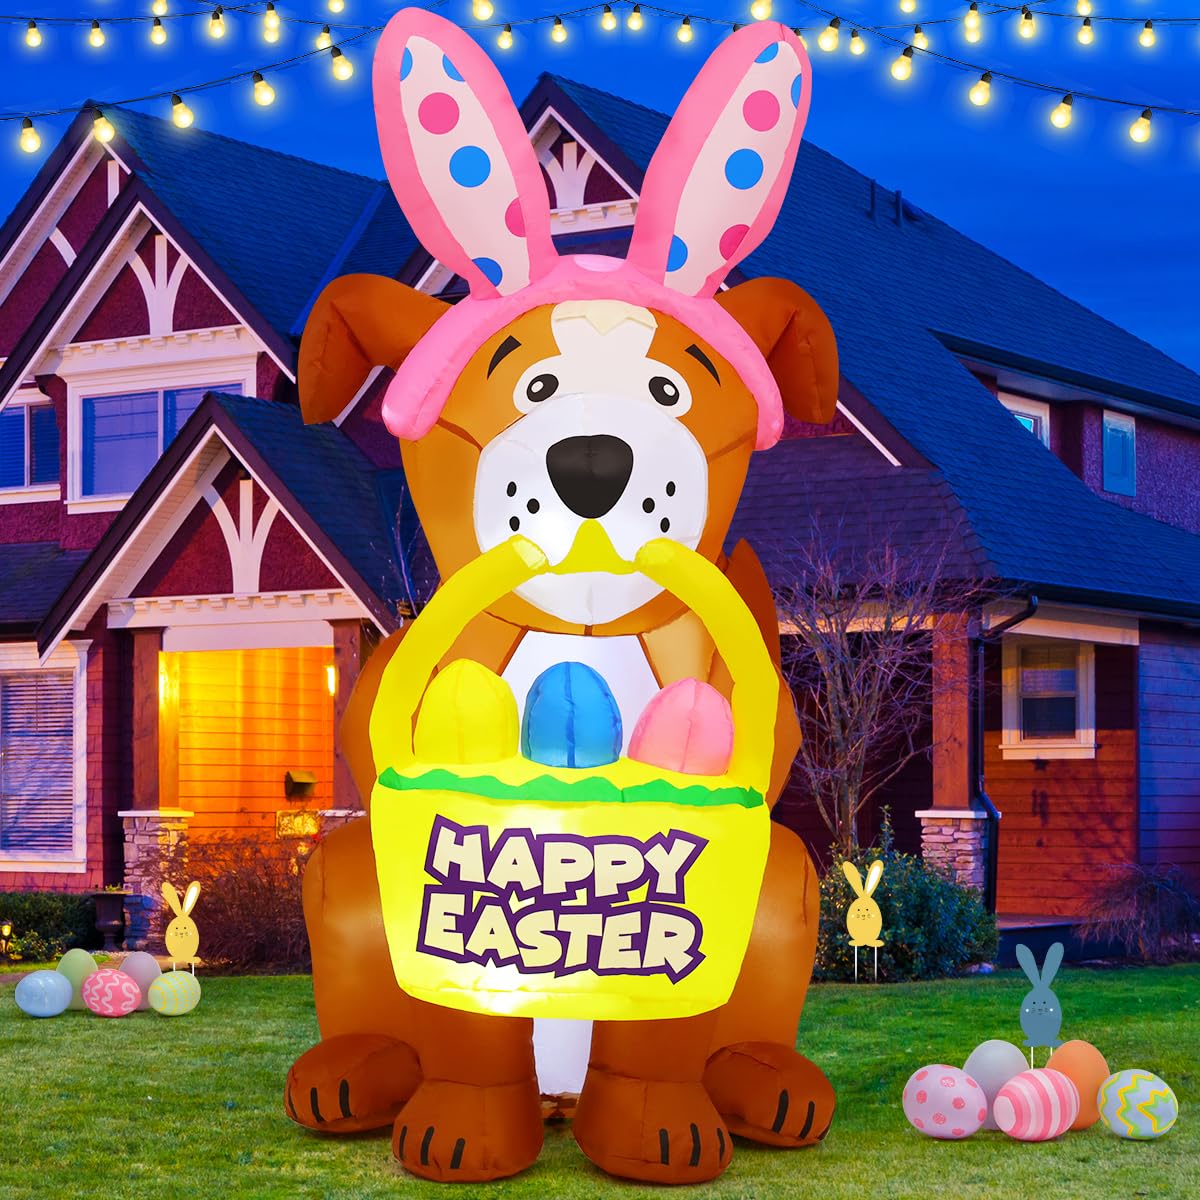 GOOSH 5 FT Easter Inflatables Outdoor Decorations, Easter Dog Blow Up Yard Decorations Easter Decor with LED Lights for Easter Party Yard Garden Lawn